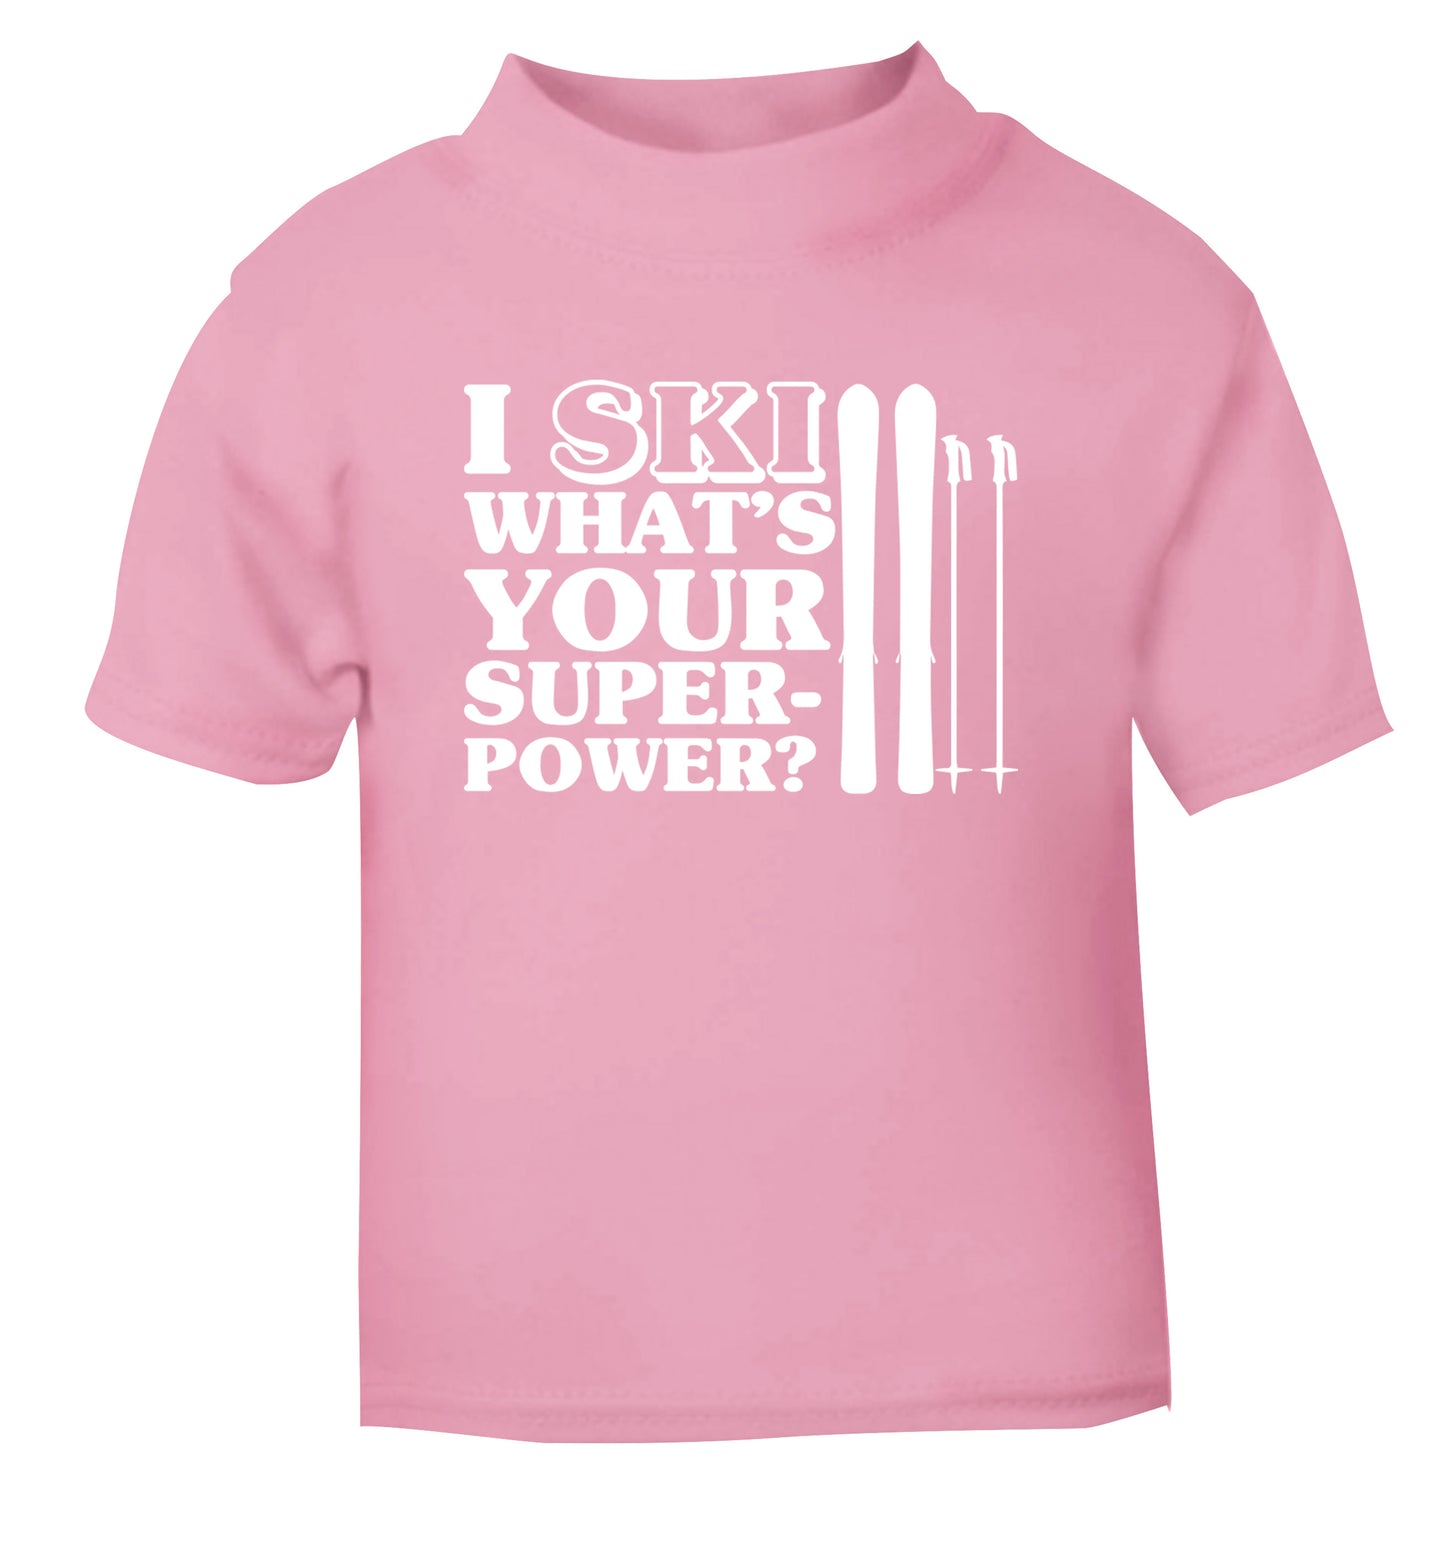 I ski what's your superpower? light pink Baby Toddler Tshirt 2 Years